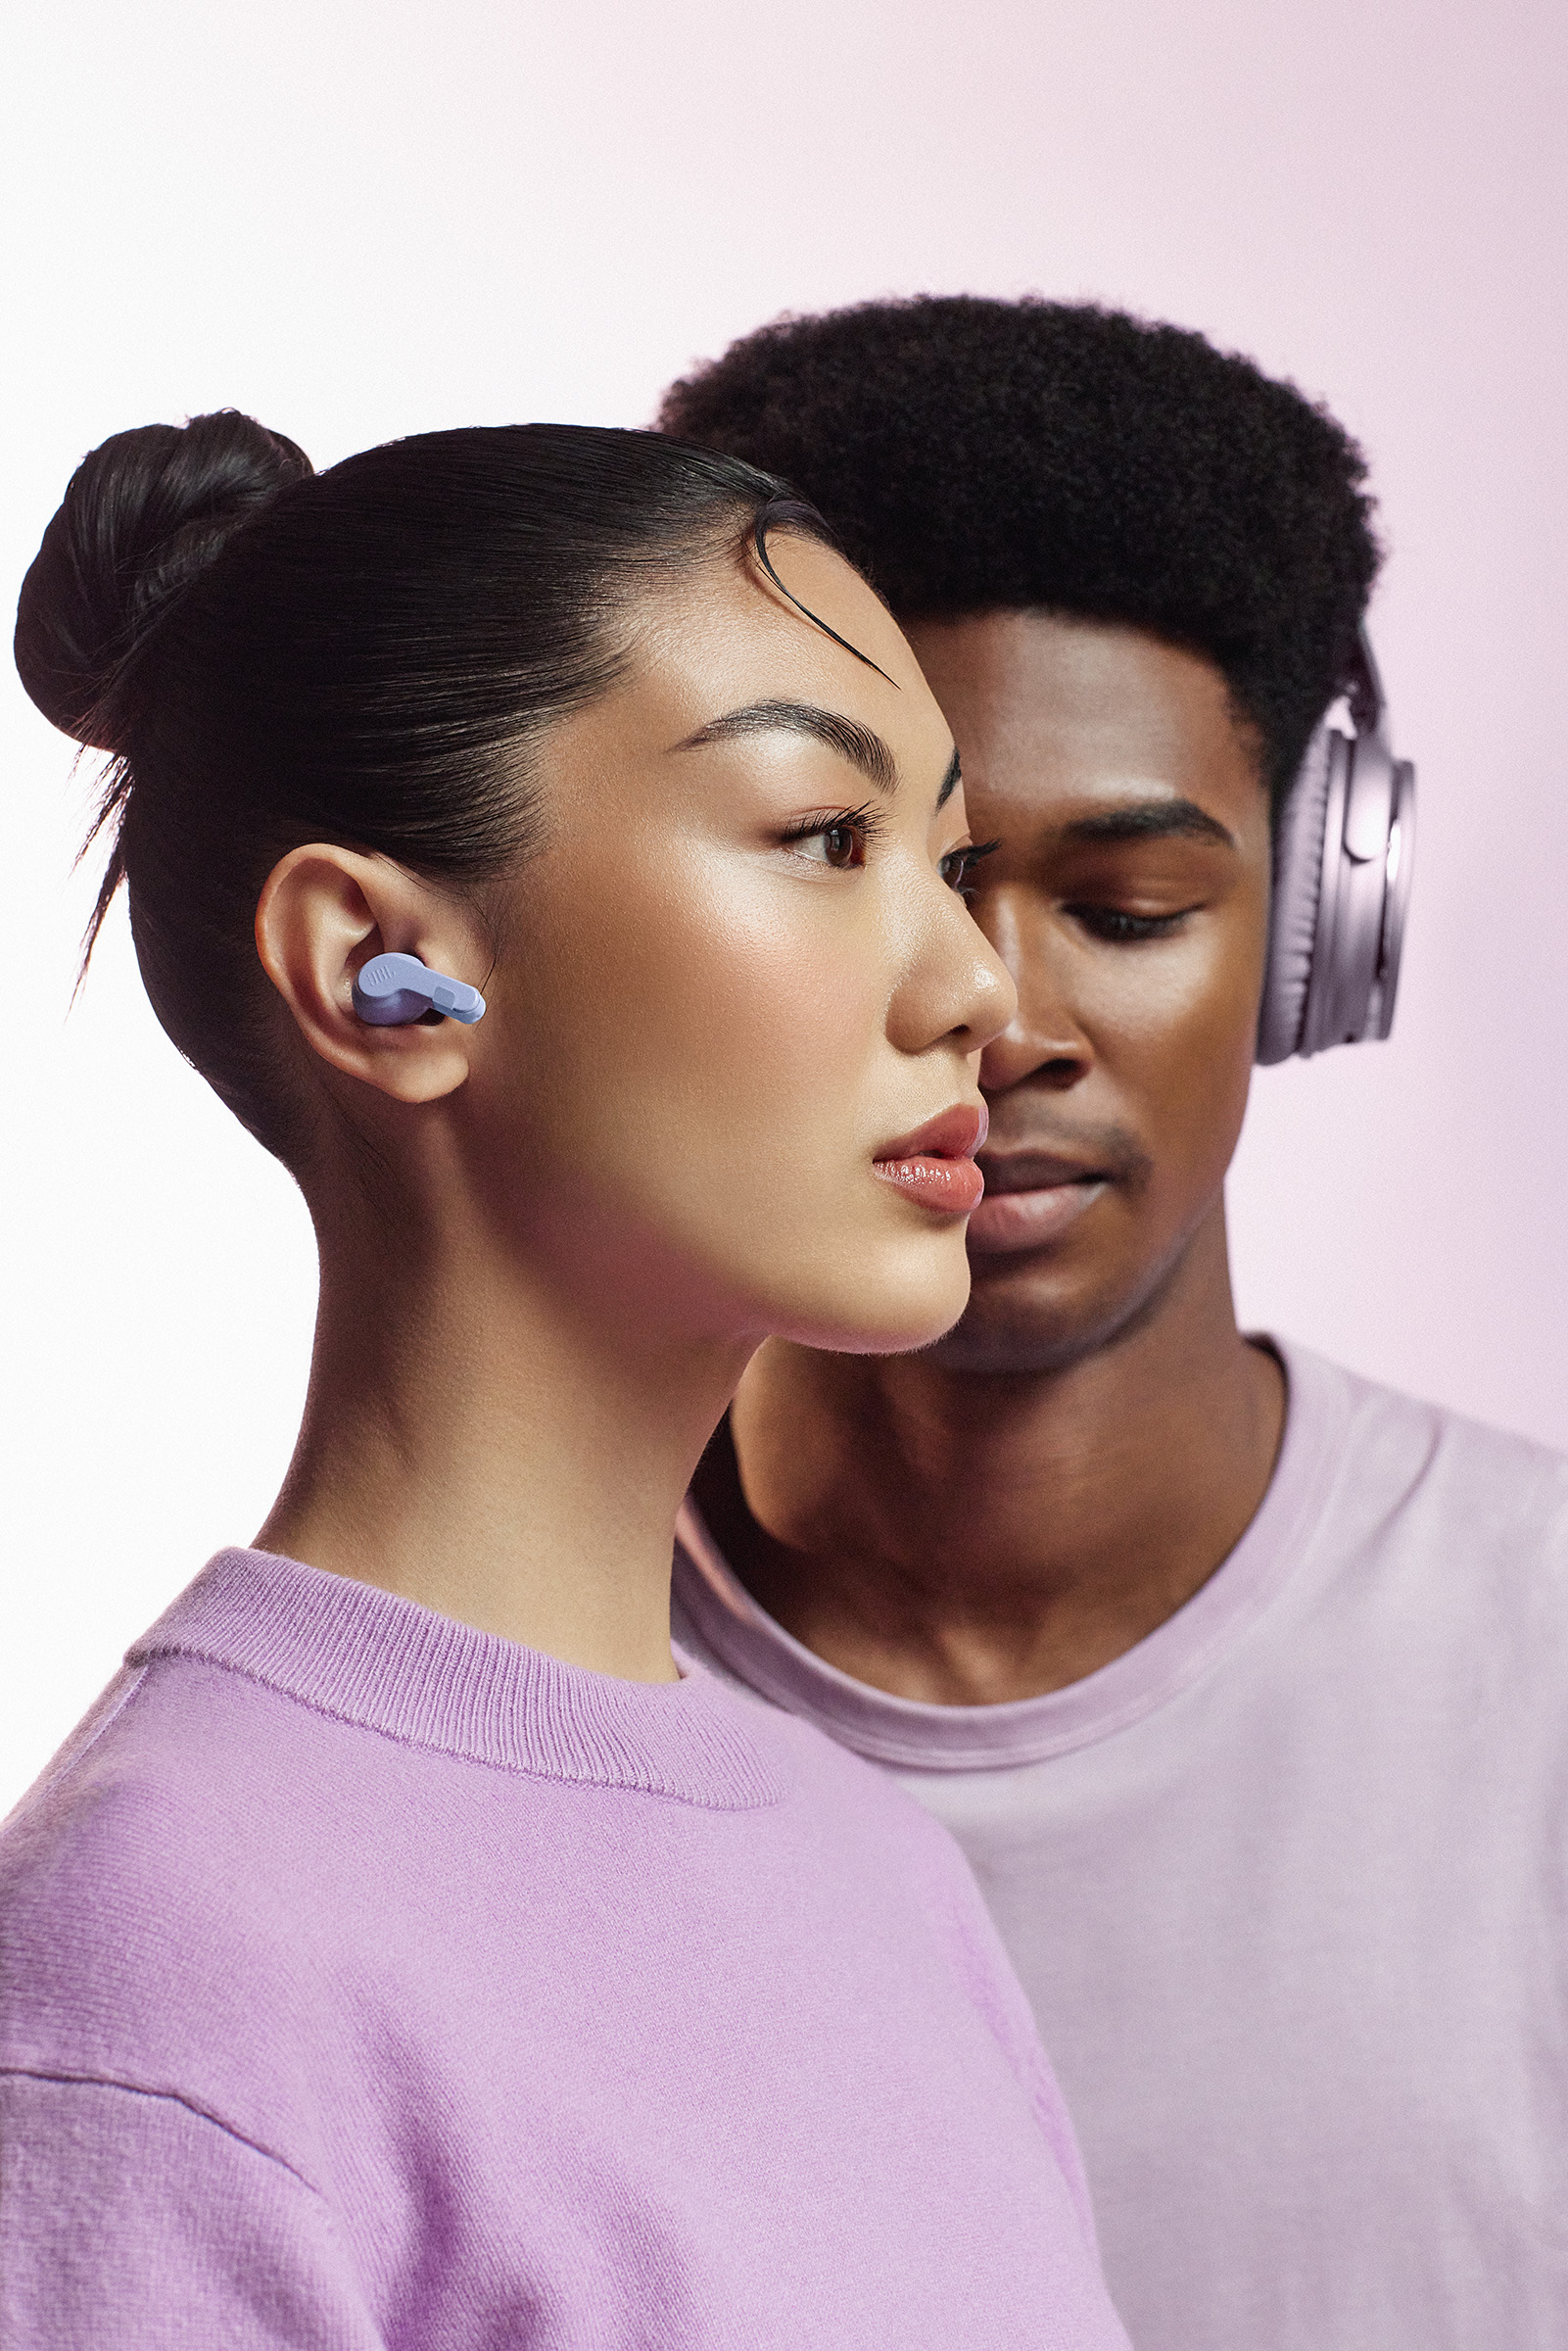 A man and a woman wearing headphones.